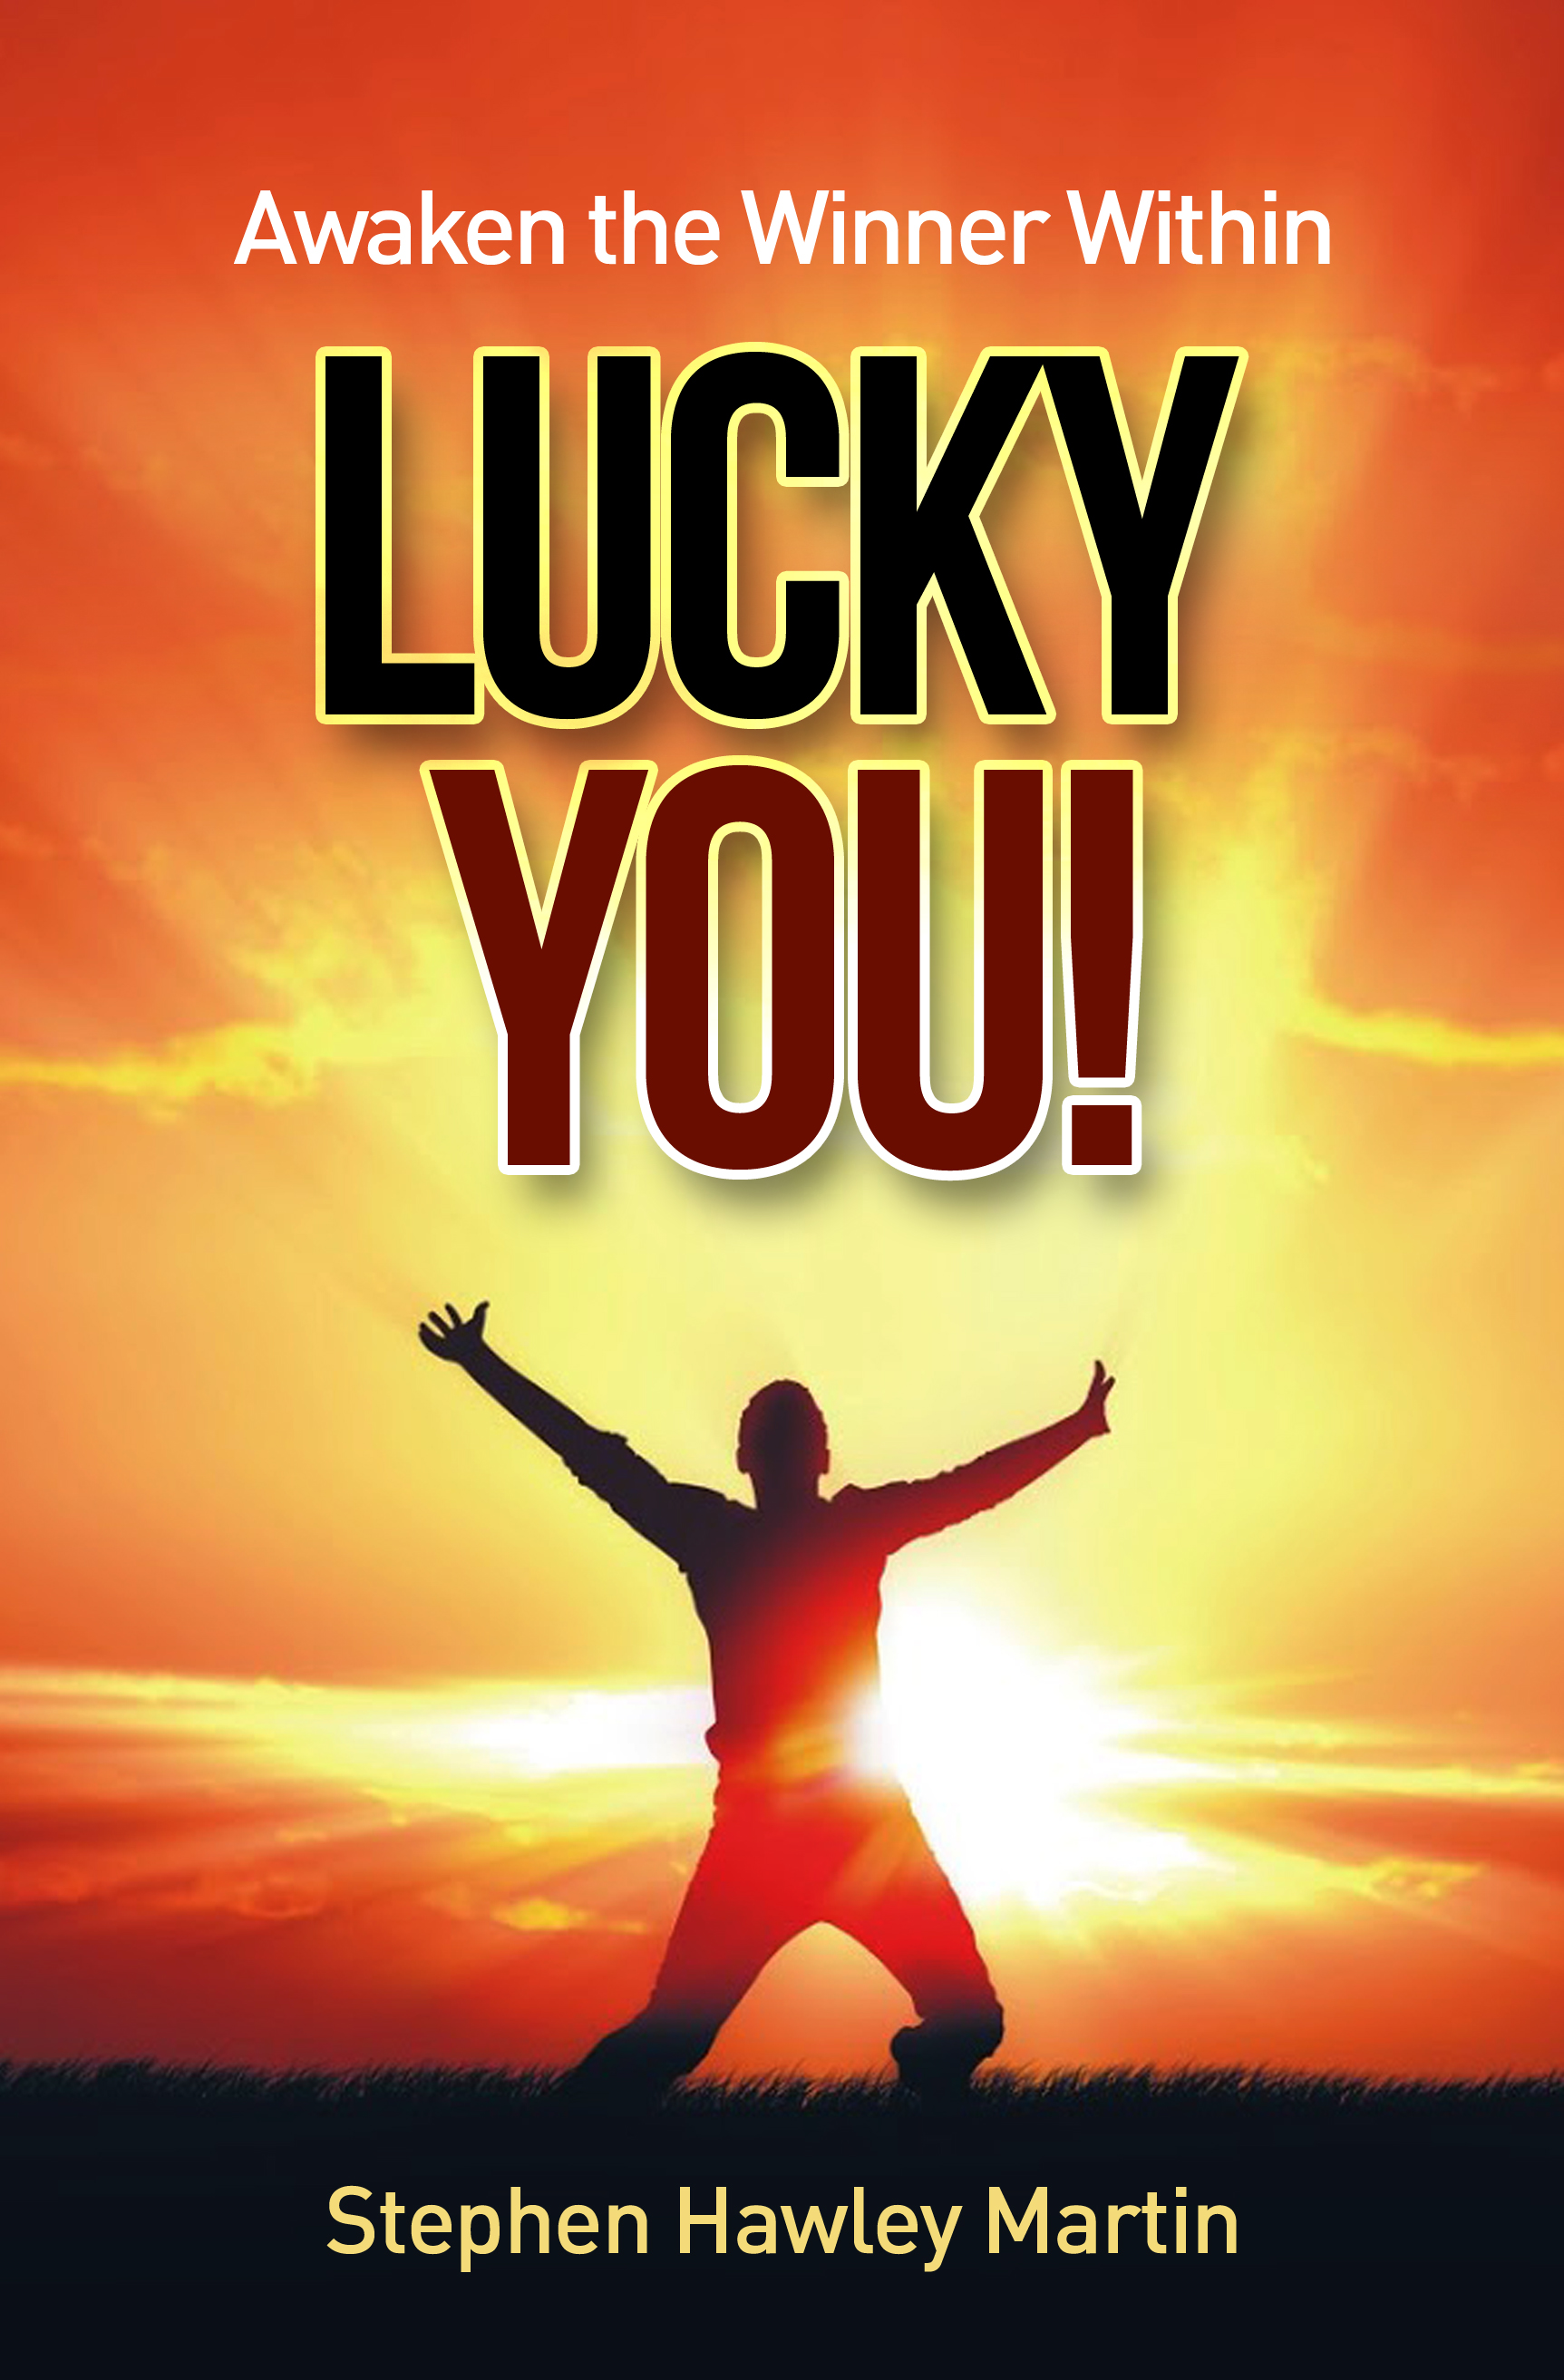 FREE: Awaken the Winner Within Lucky You! by Stephen Hawley Martin